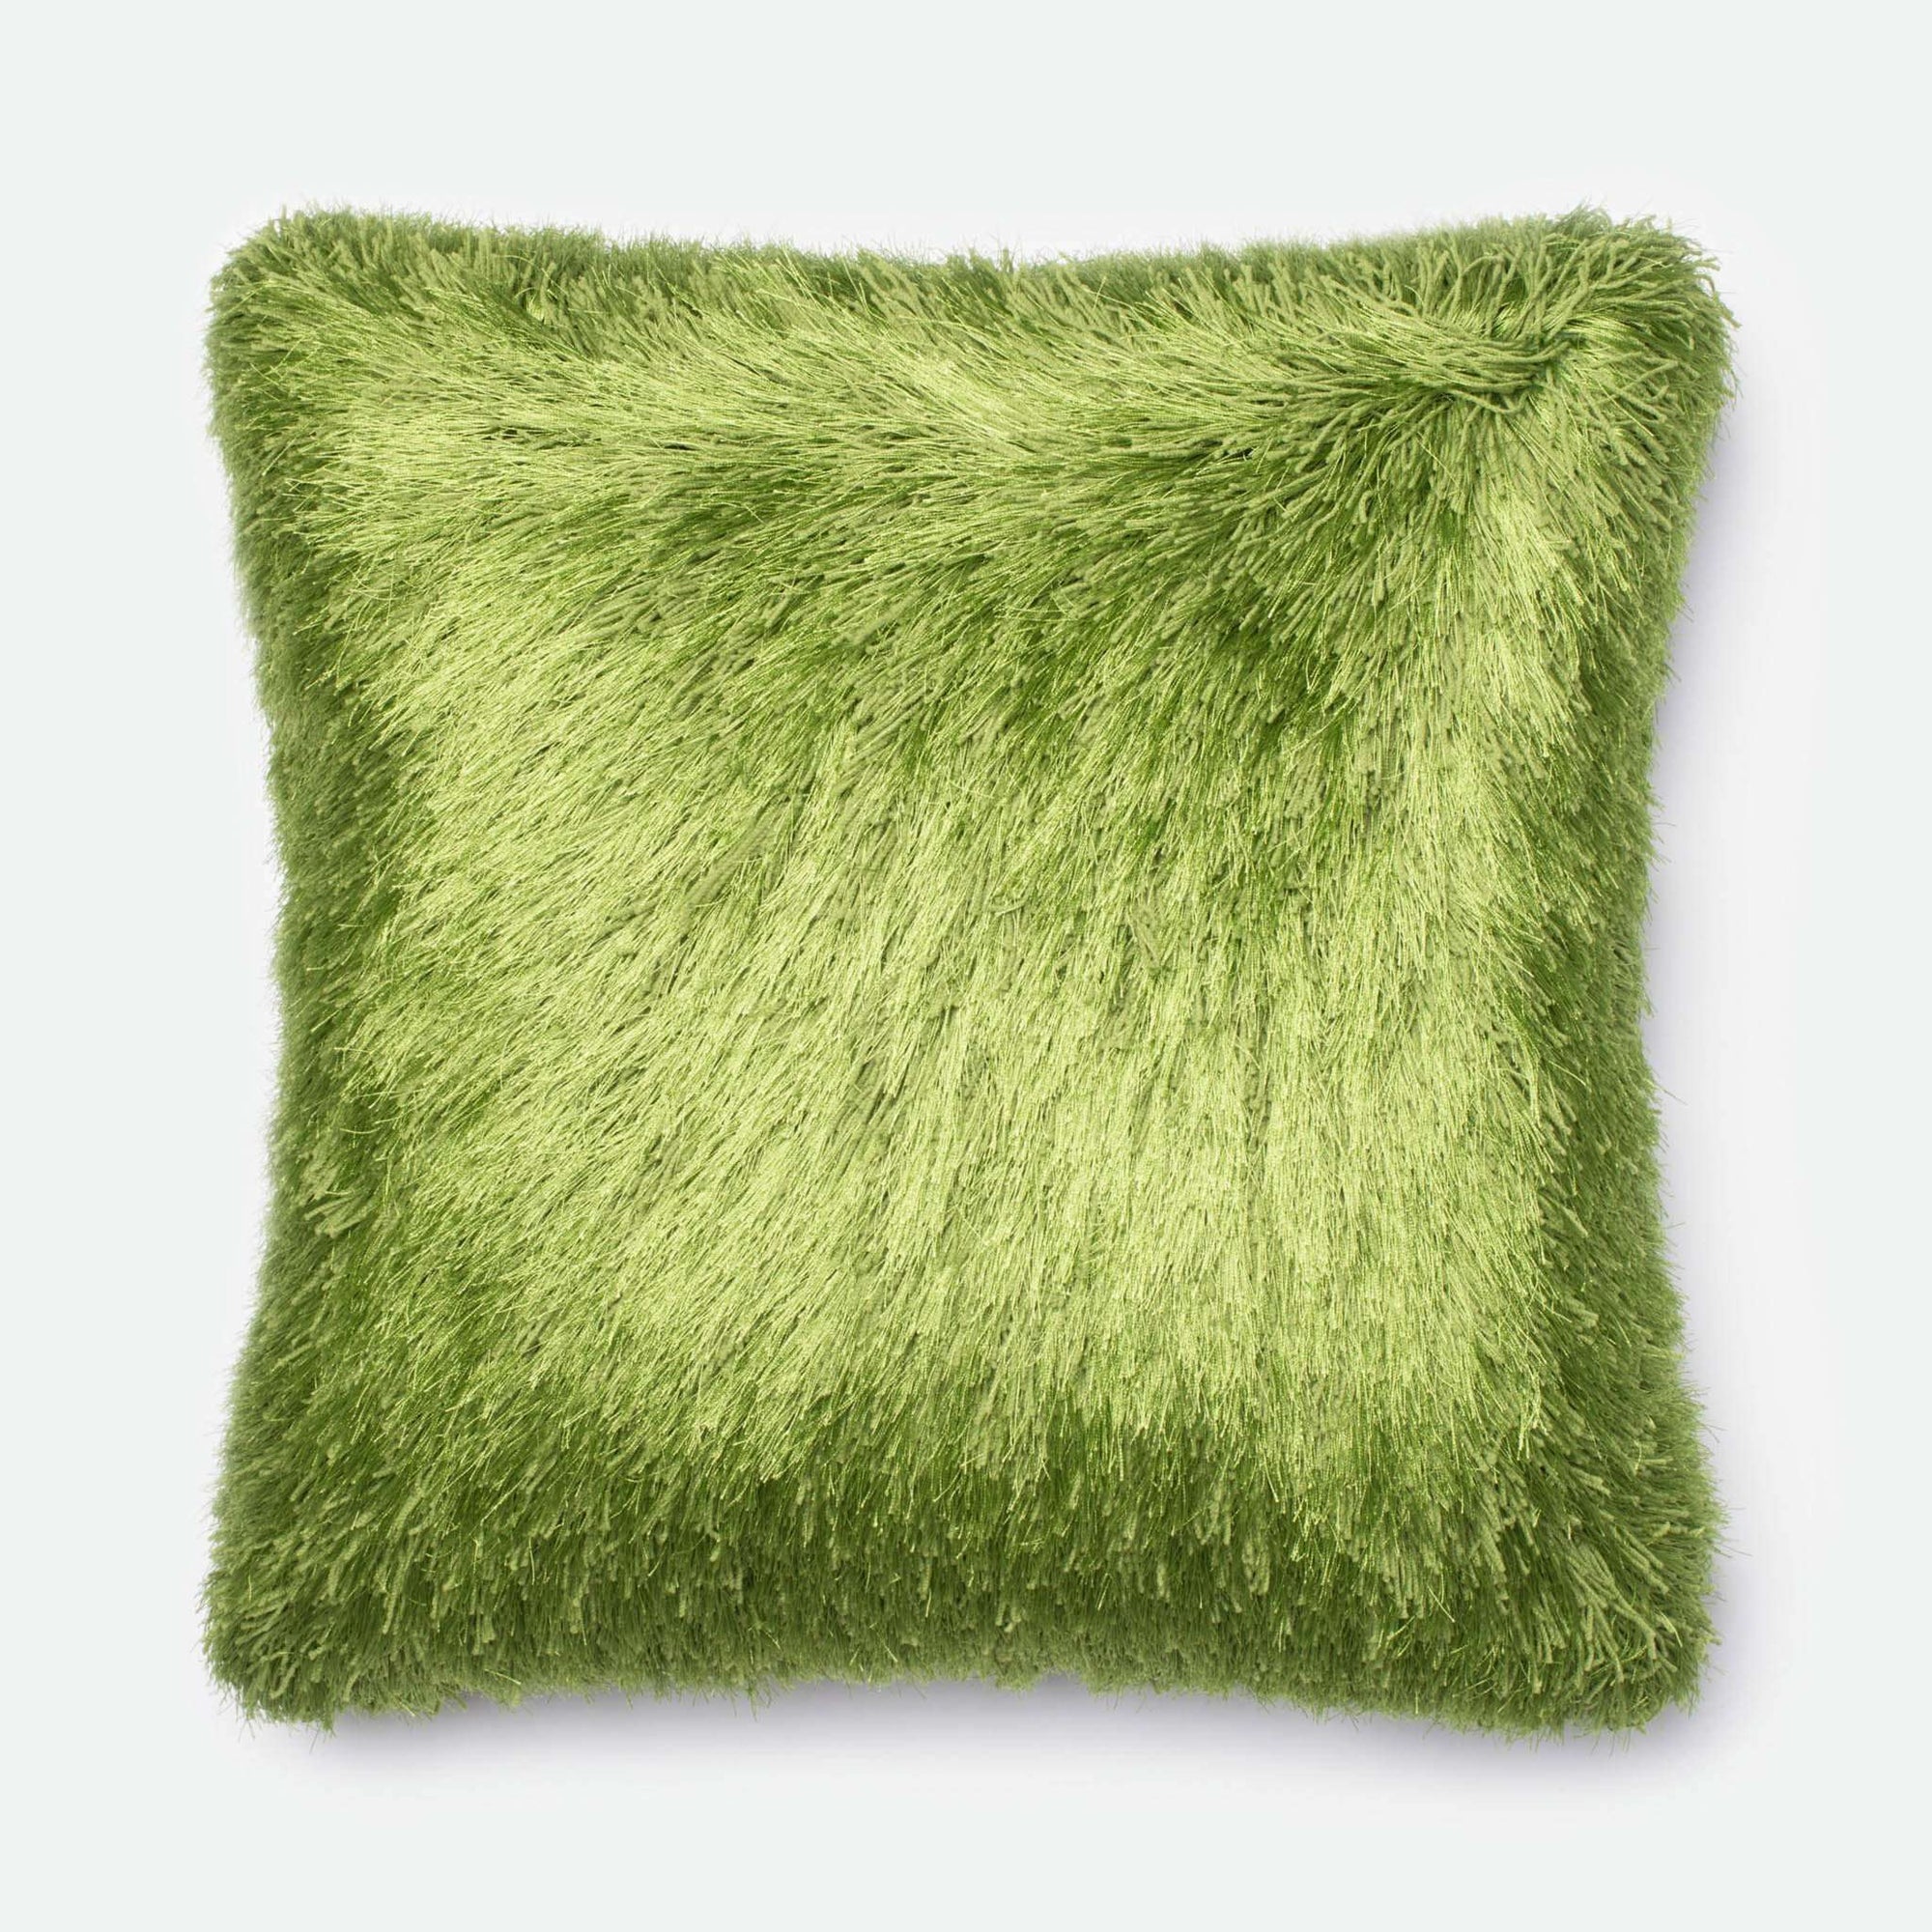 Green Square P0245 Pillow - Rug & Home